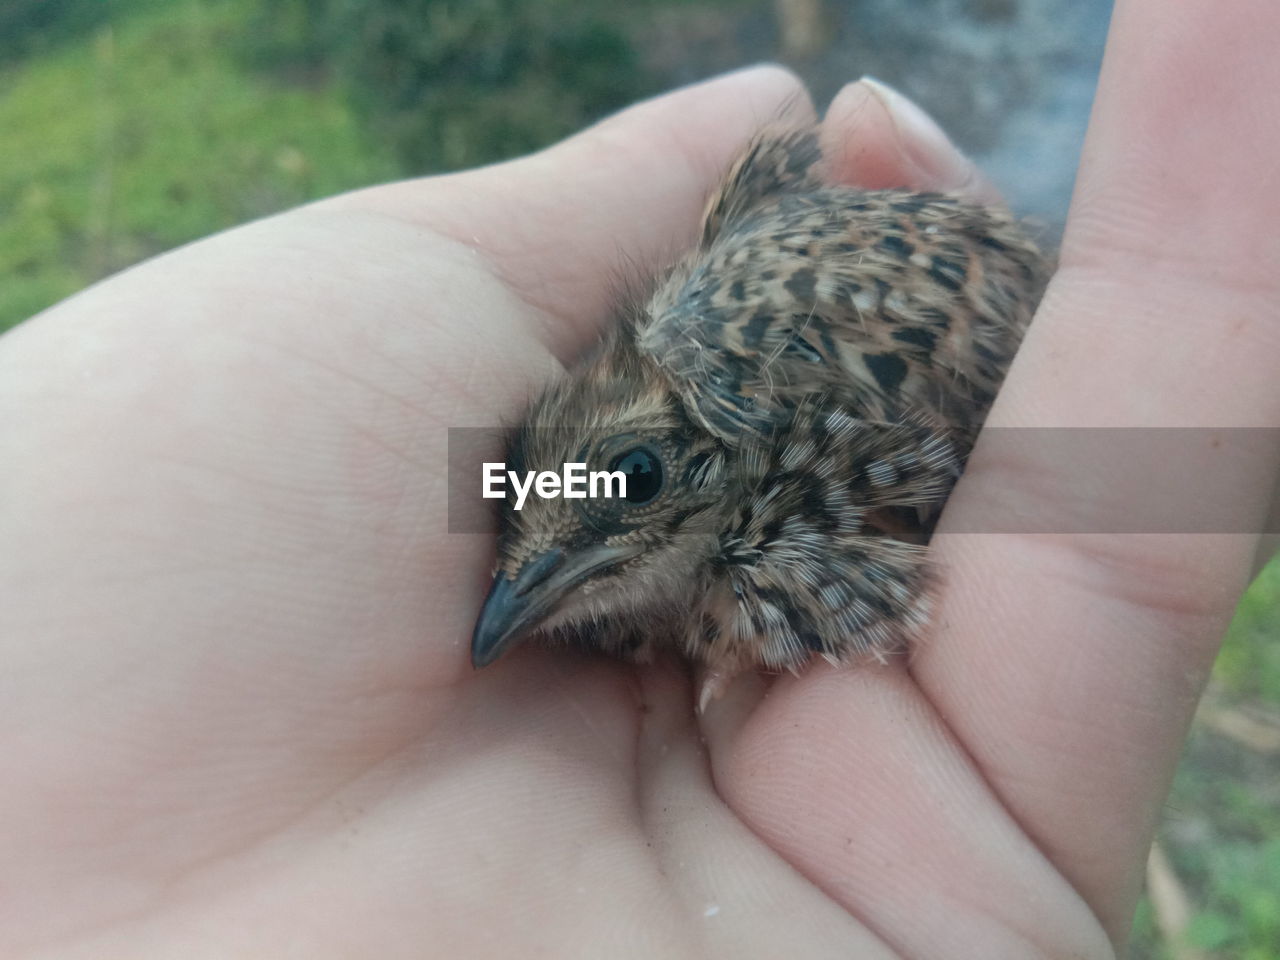 CROPPED IMAGE OF HAND HOLDING SMALL BIRD